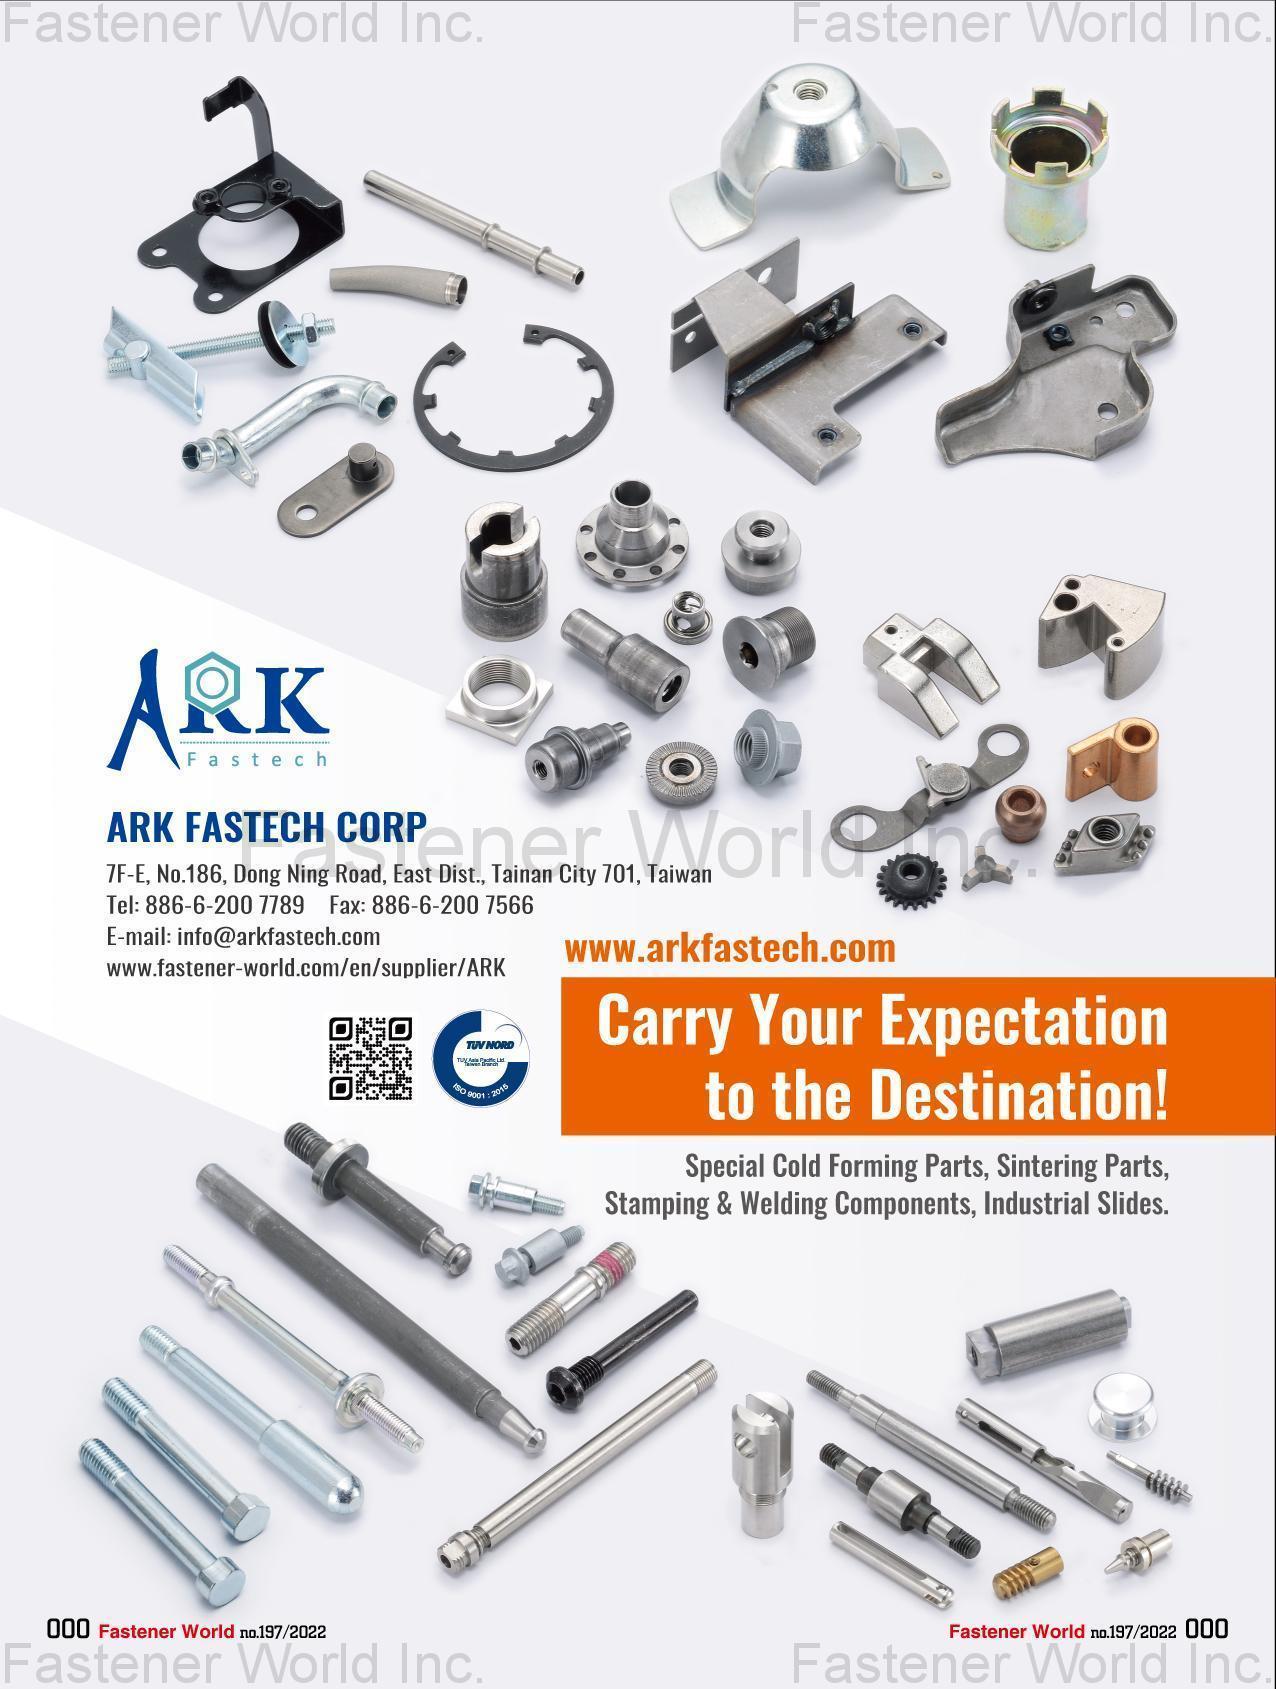 ARK FASTECH CORP , Special Cold Forming Parts, Sintering Parts, Stamping & Welding Components, Industrial Slides